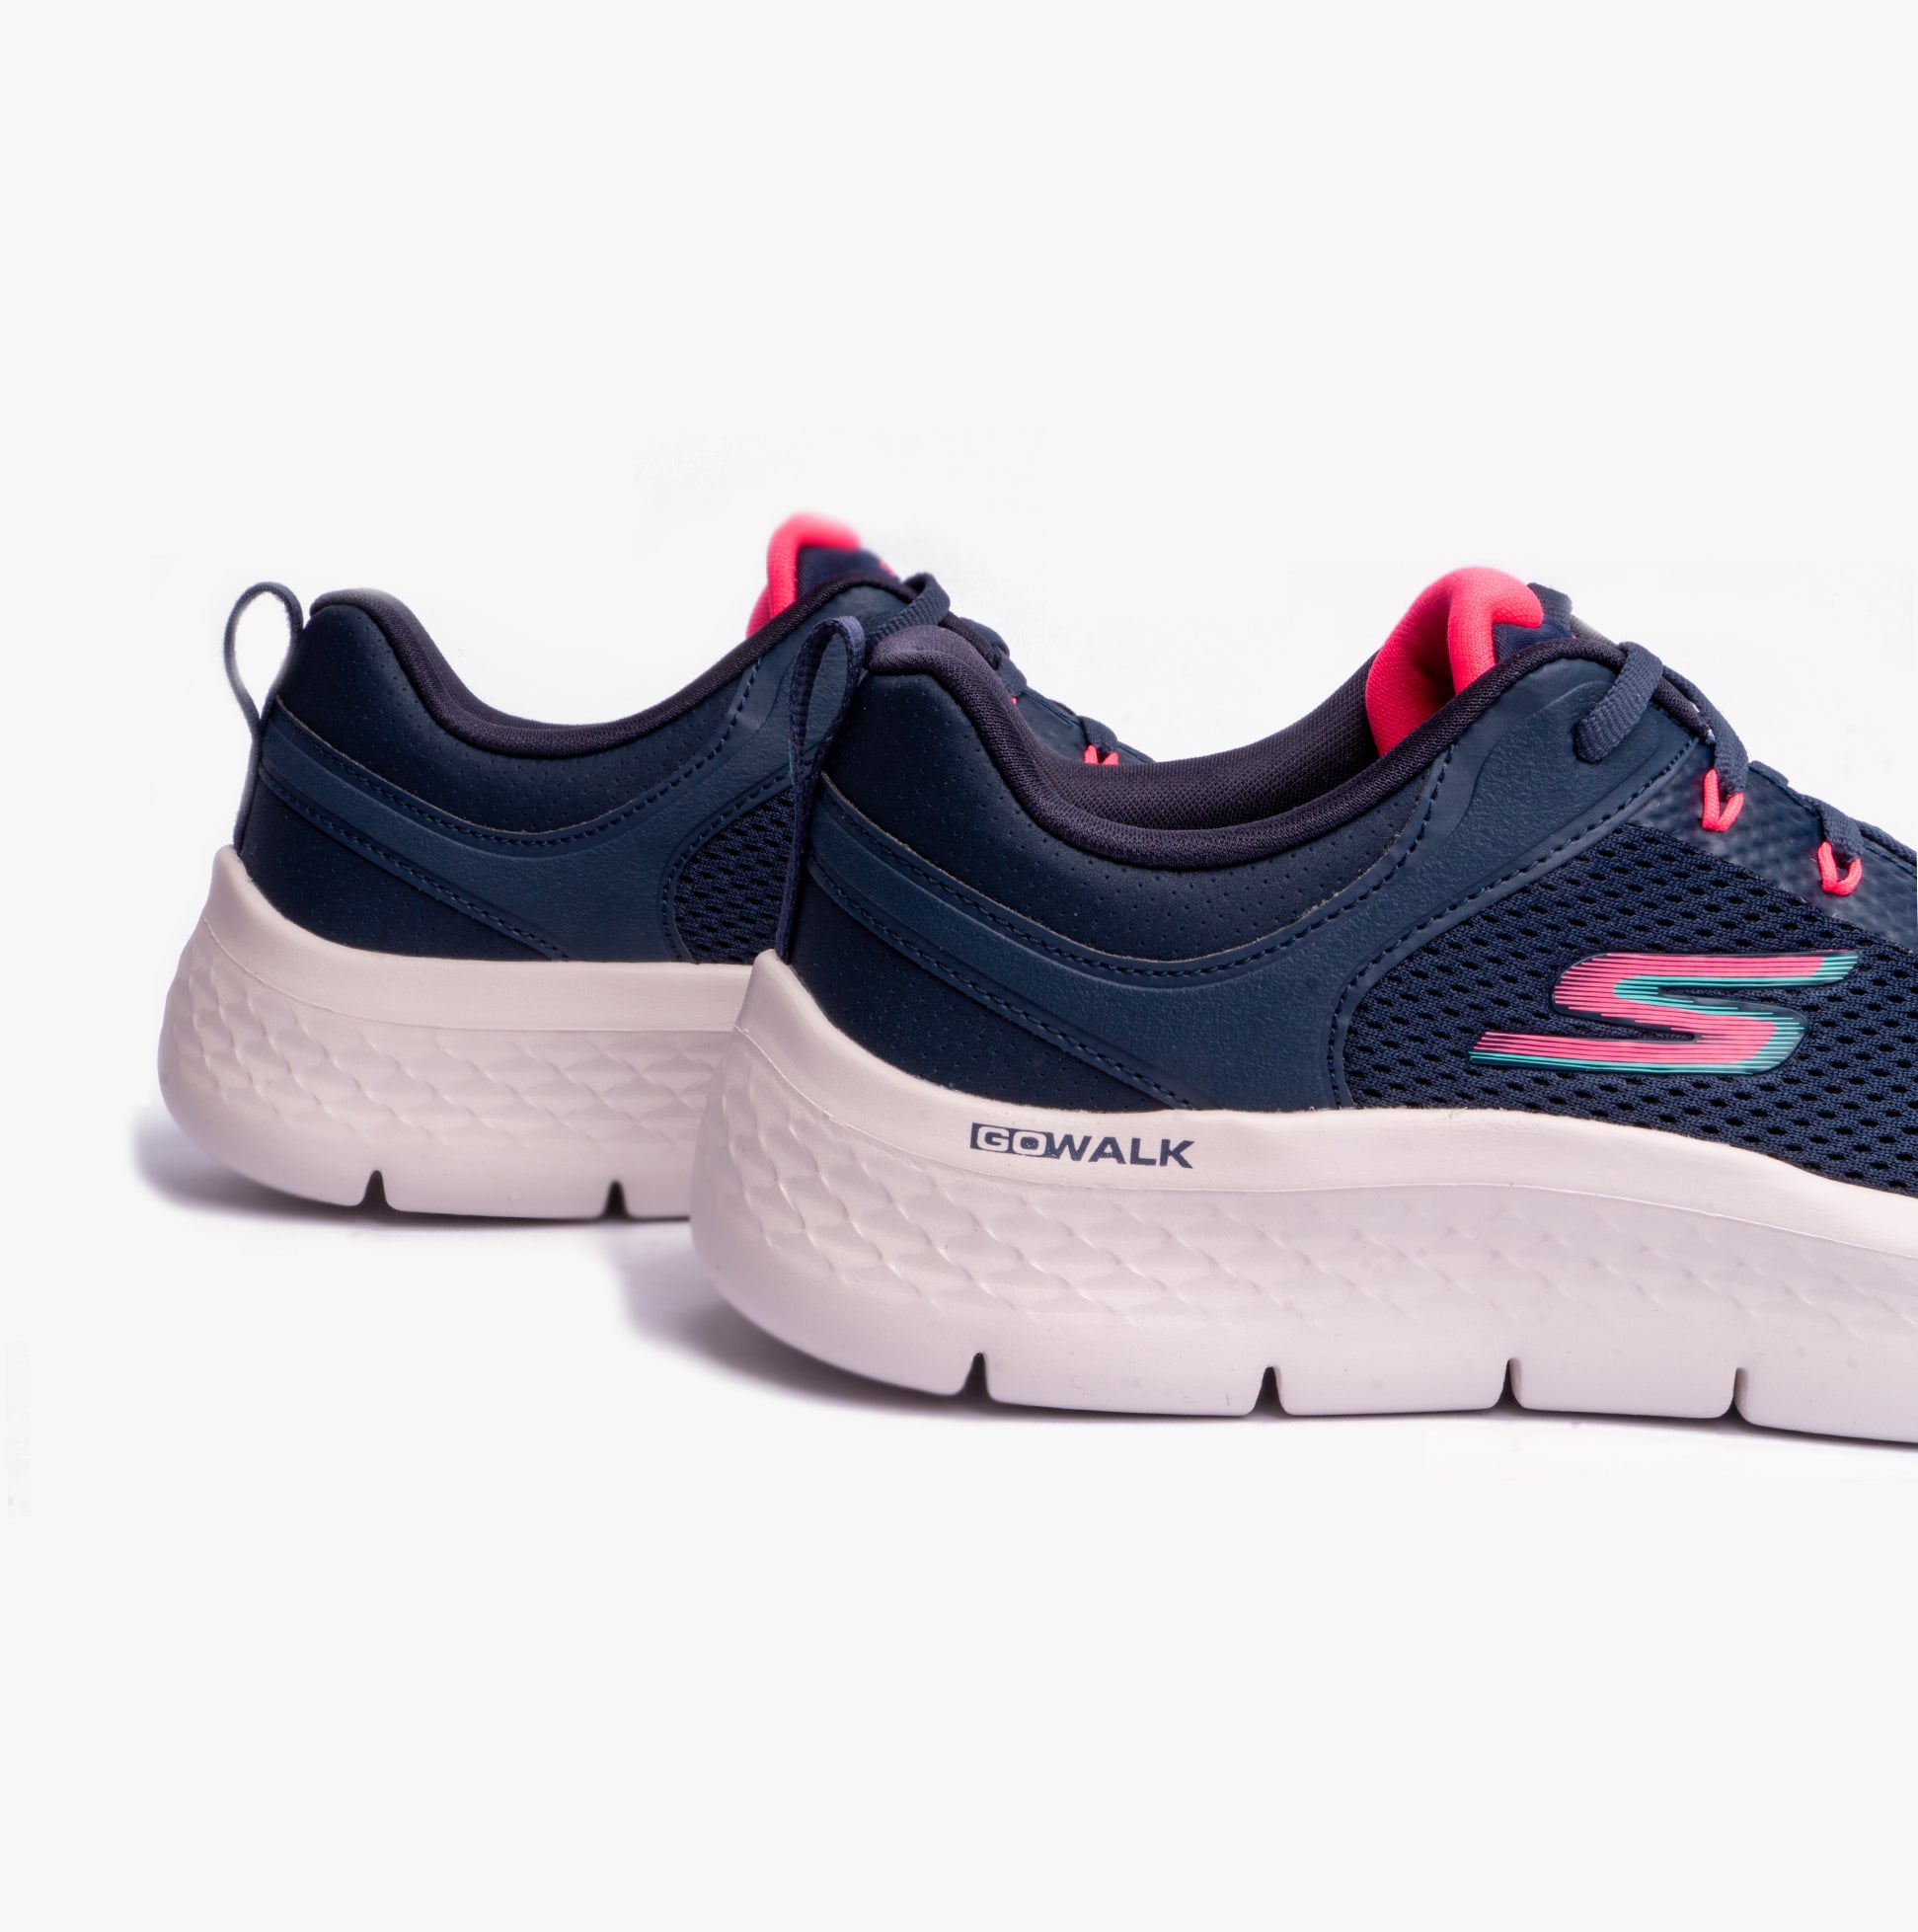 Skechers-[124817-NVCL]-Navy-Coral-2.jpg